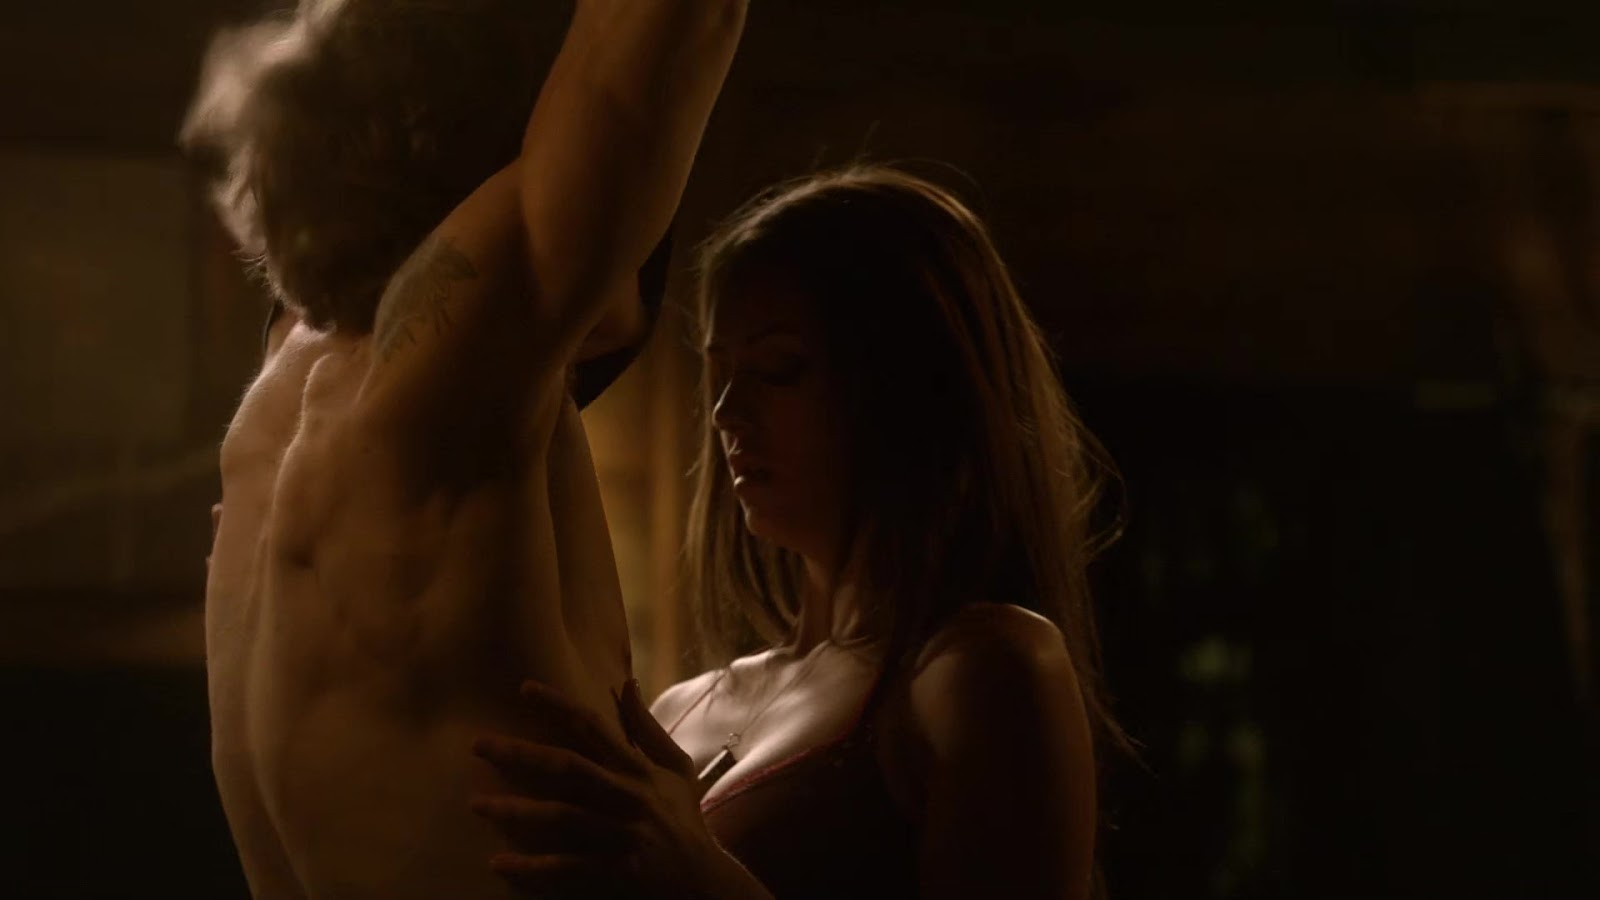 ausCAPS: Paul Wesley shirtless in The Vampire Diaries 1-10. 